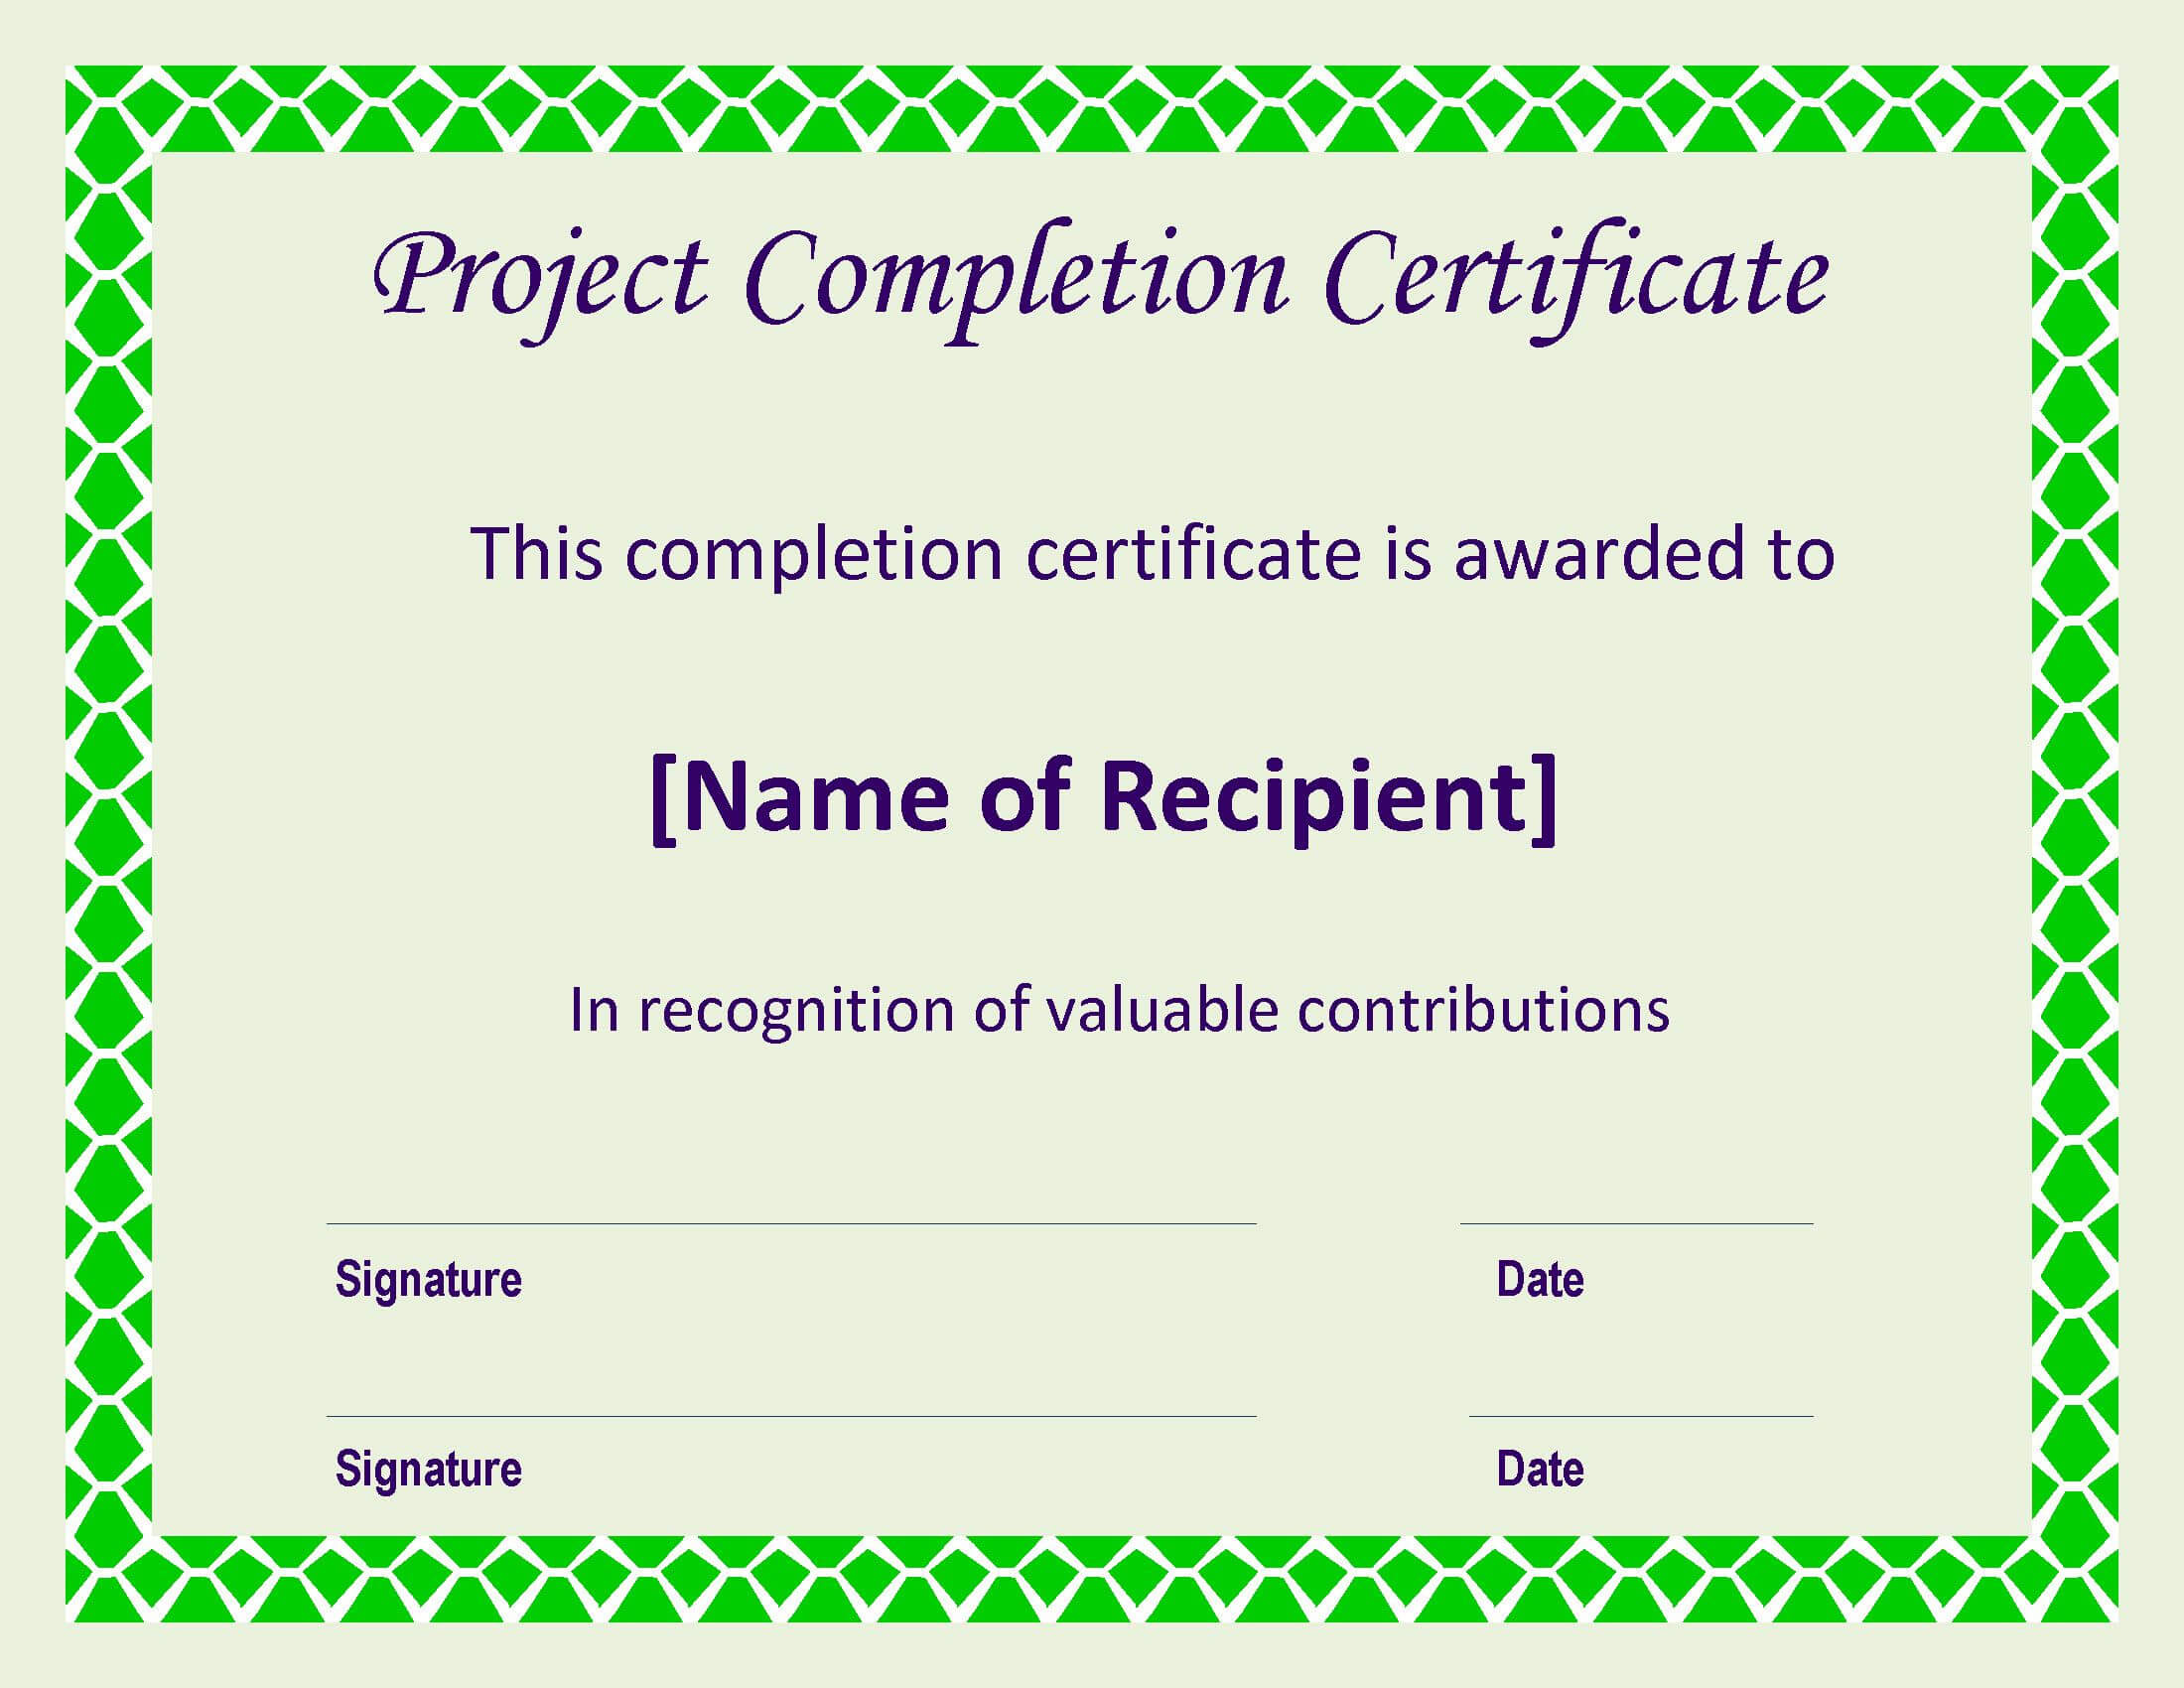 Certificate Of Completion Project | Templates At Inside Certificate Template For Project Completion